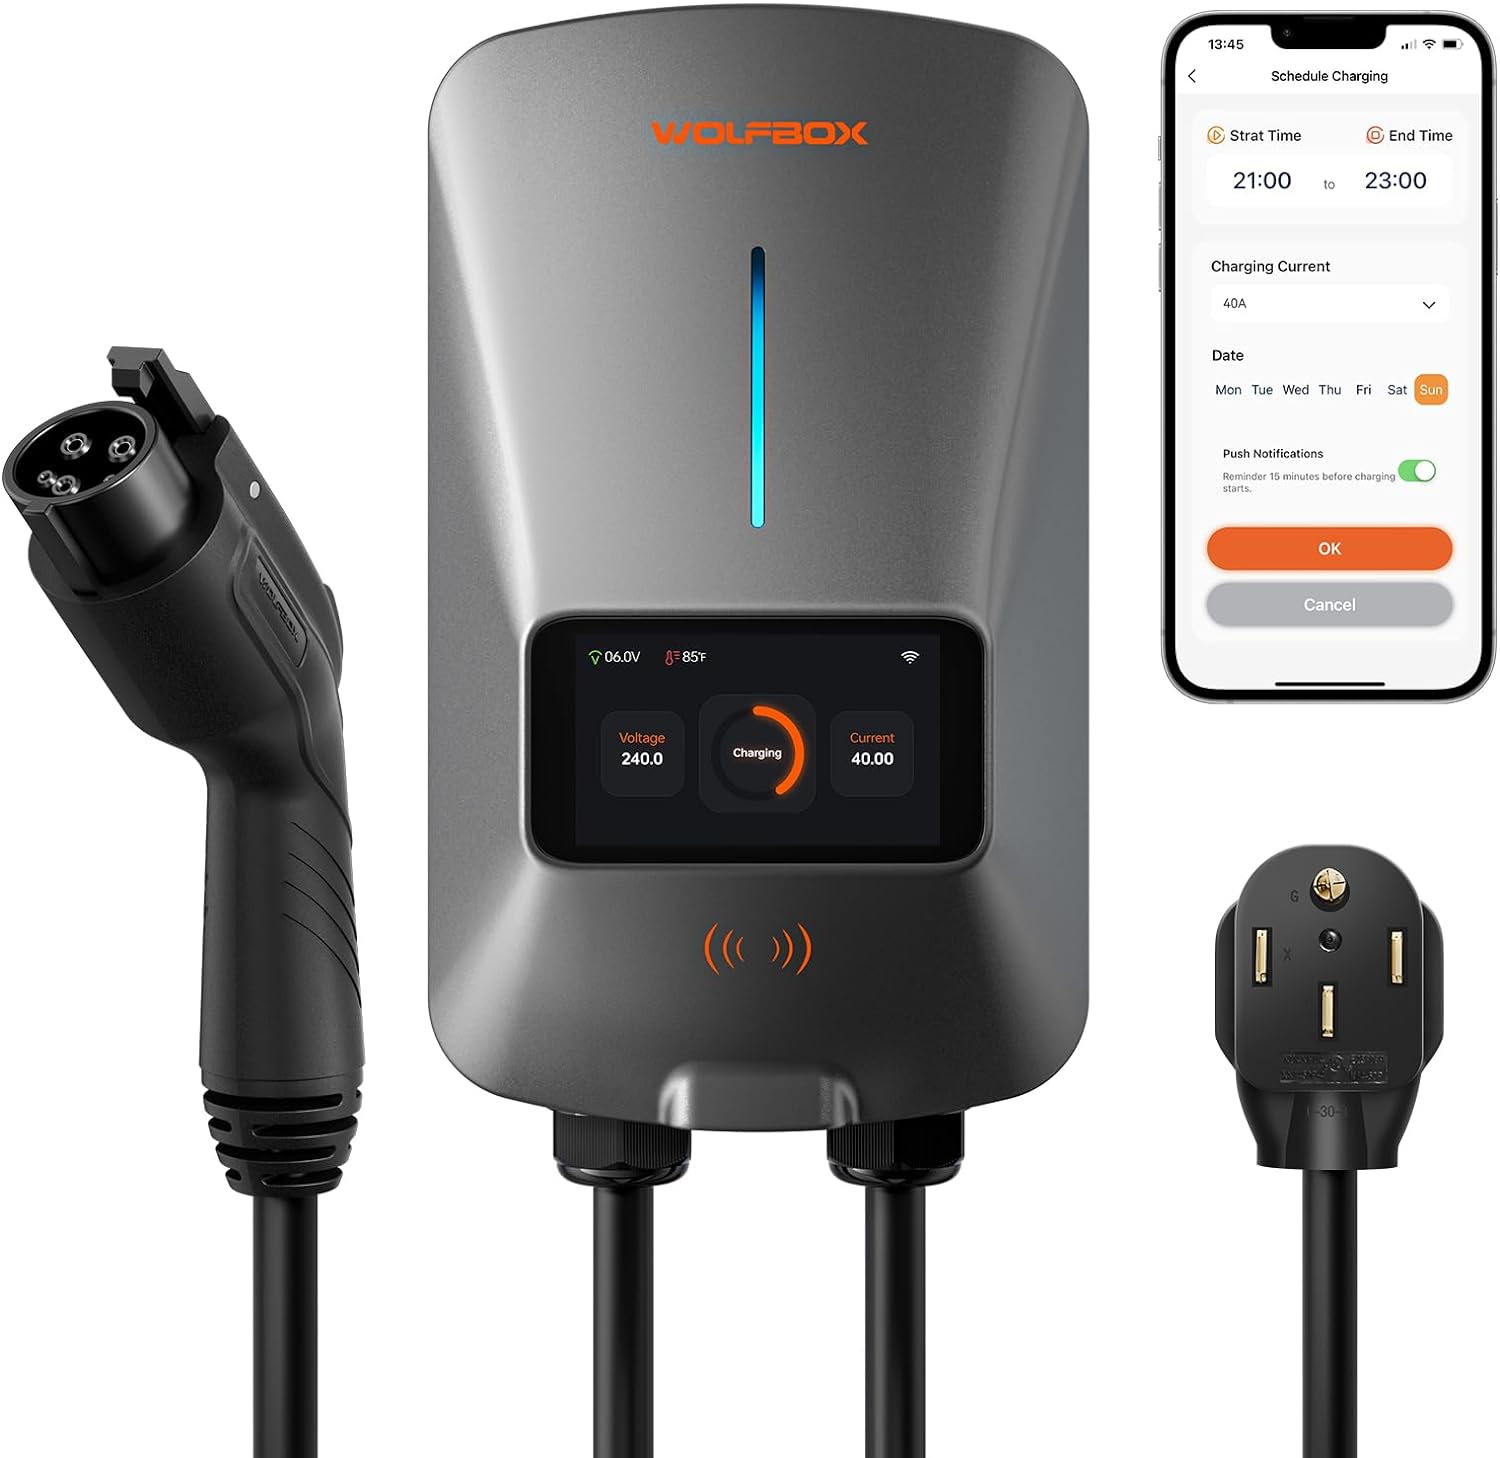 WOLFBOX Level 2 EV Charger 40 Amp with WiFi and Bluetooth  WOLFBOX NEMA 14-50 Plug; 40 Amp; Easier Installation  